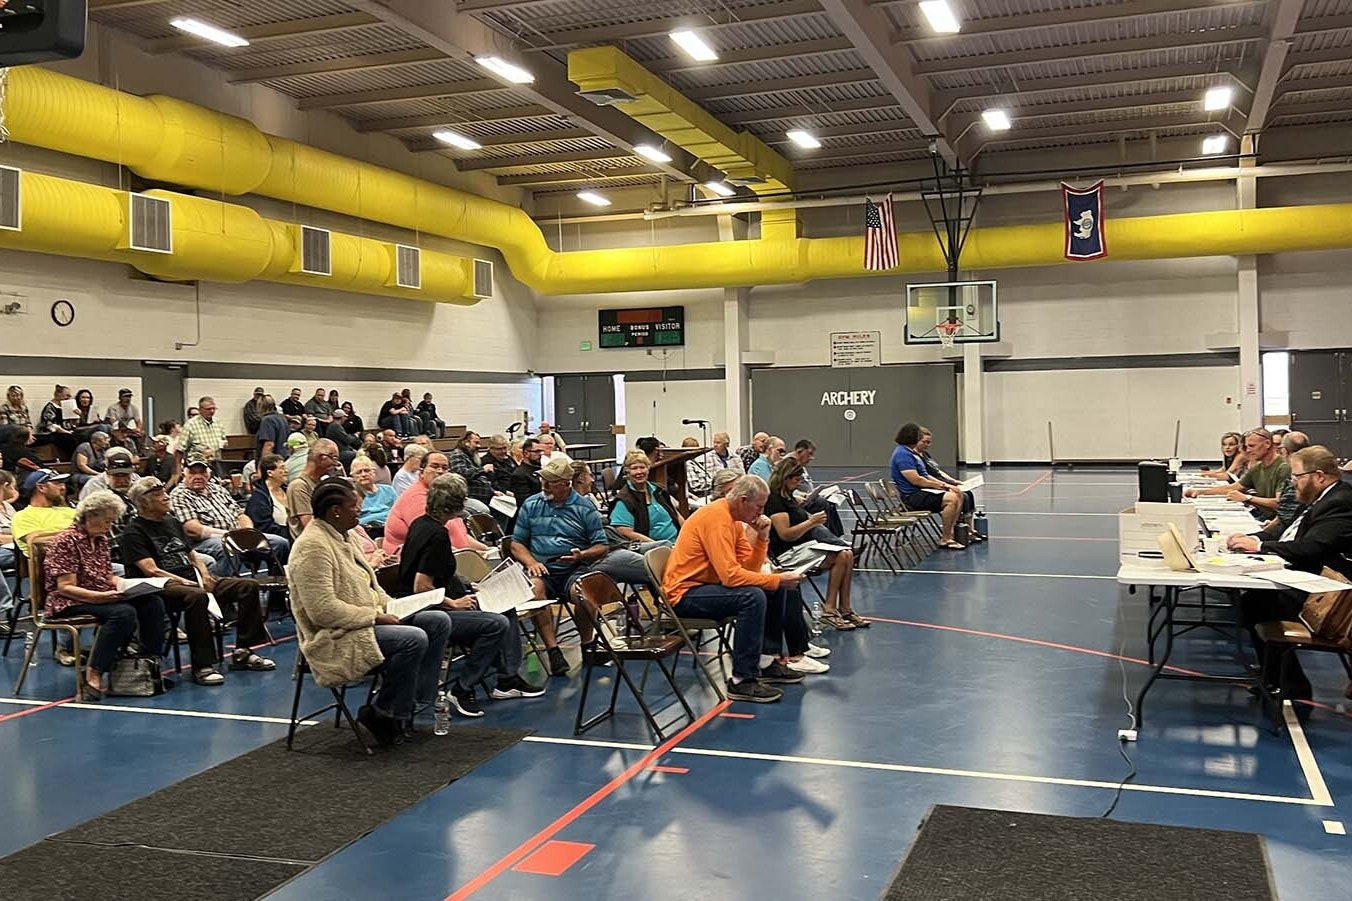 Hanna, in Carbon County, has a population of 683, but a controversial town council meeting late Tuesday drew a sizable crowd.